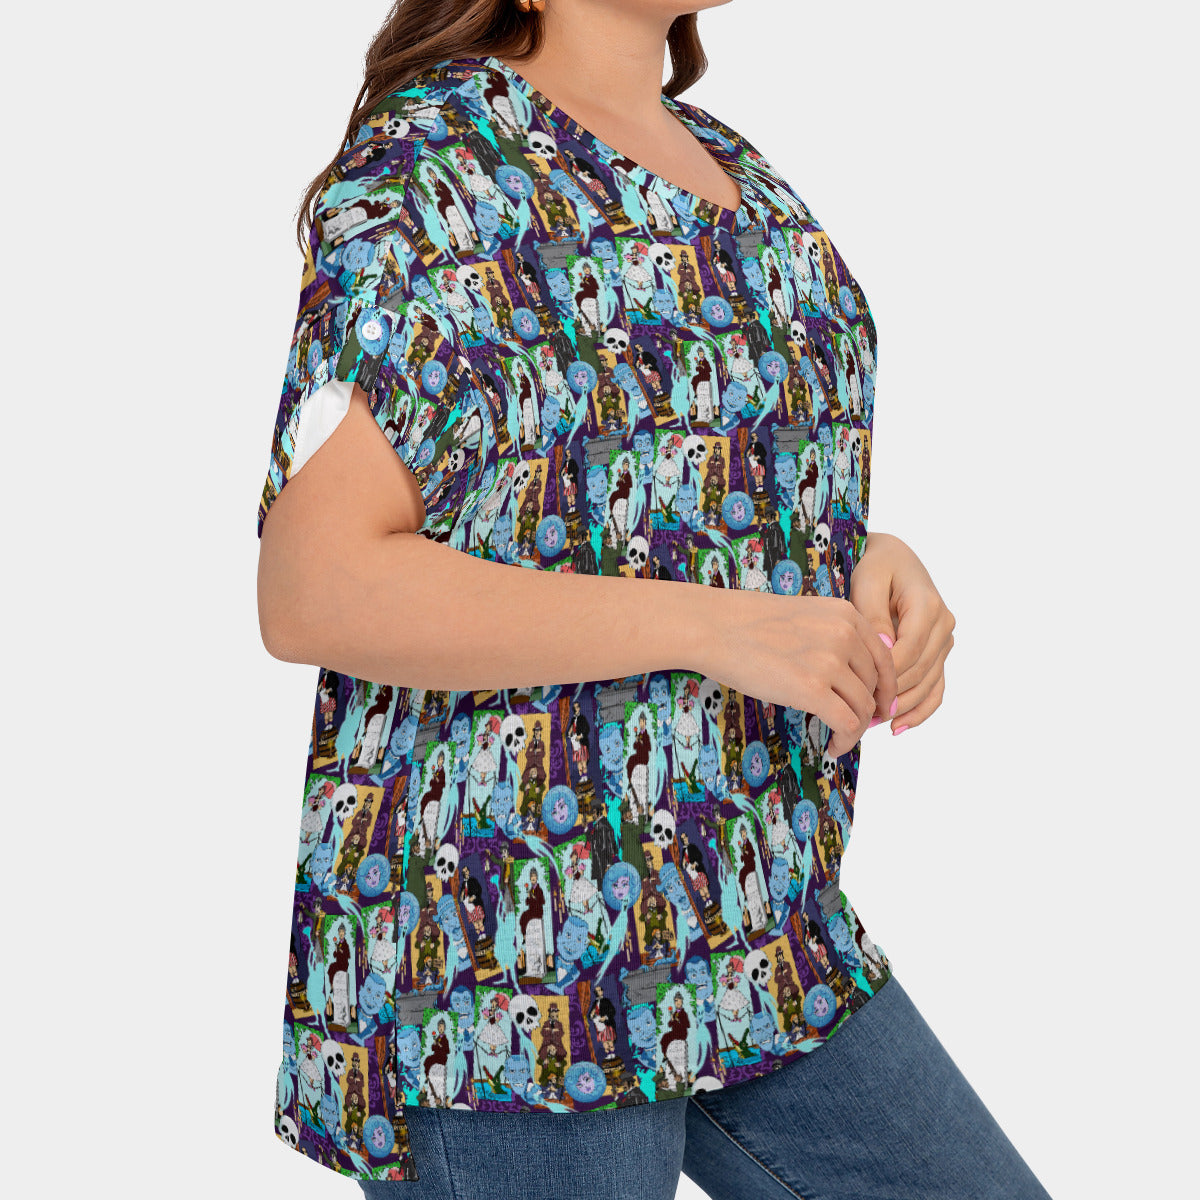 Haunted Mansion Favorites Women's Plus Size Short Sleeve T-shirt With Sleeve Loops